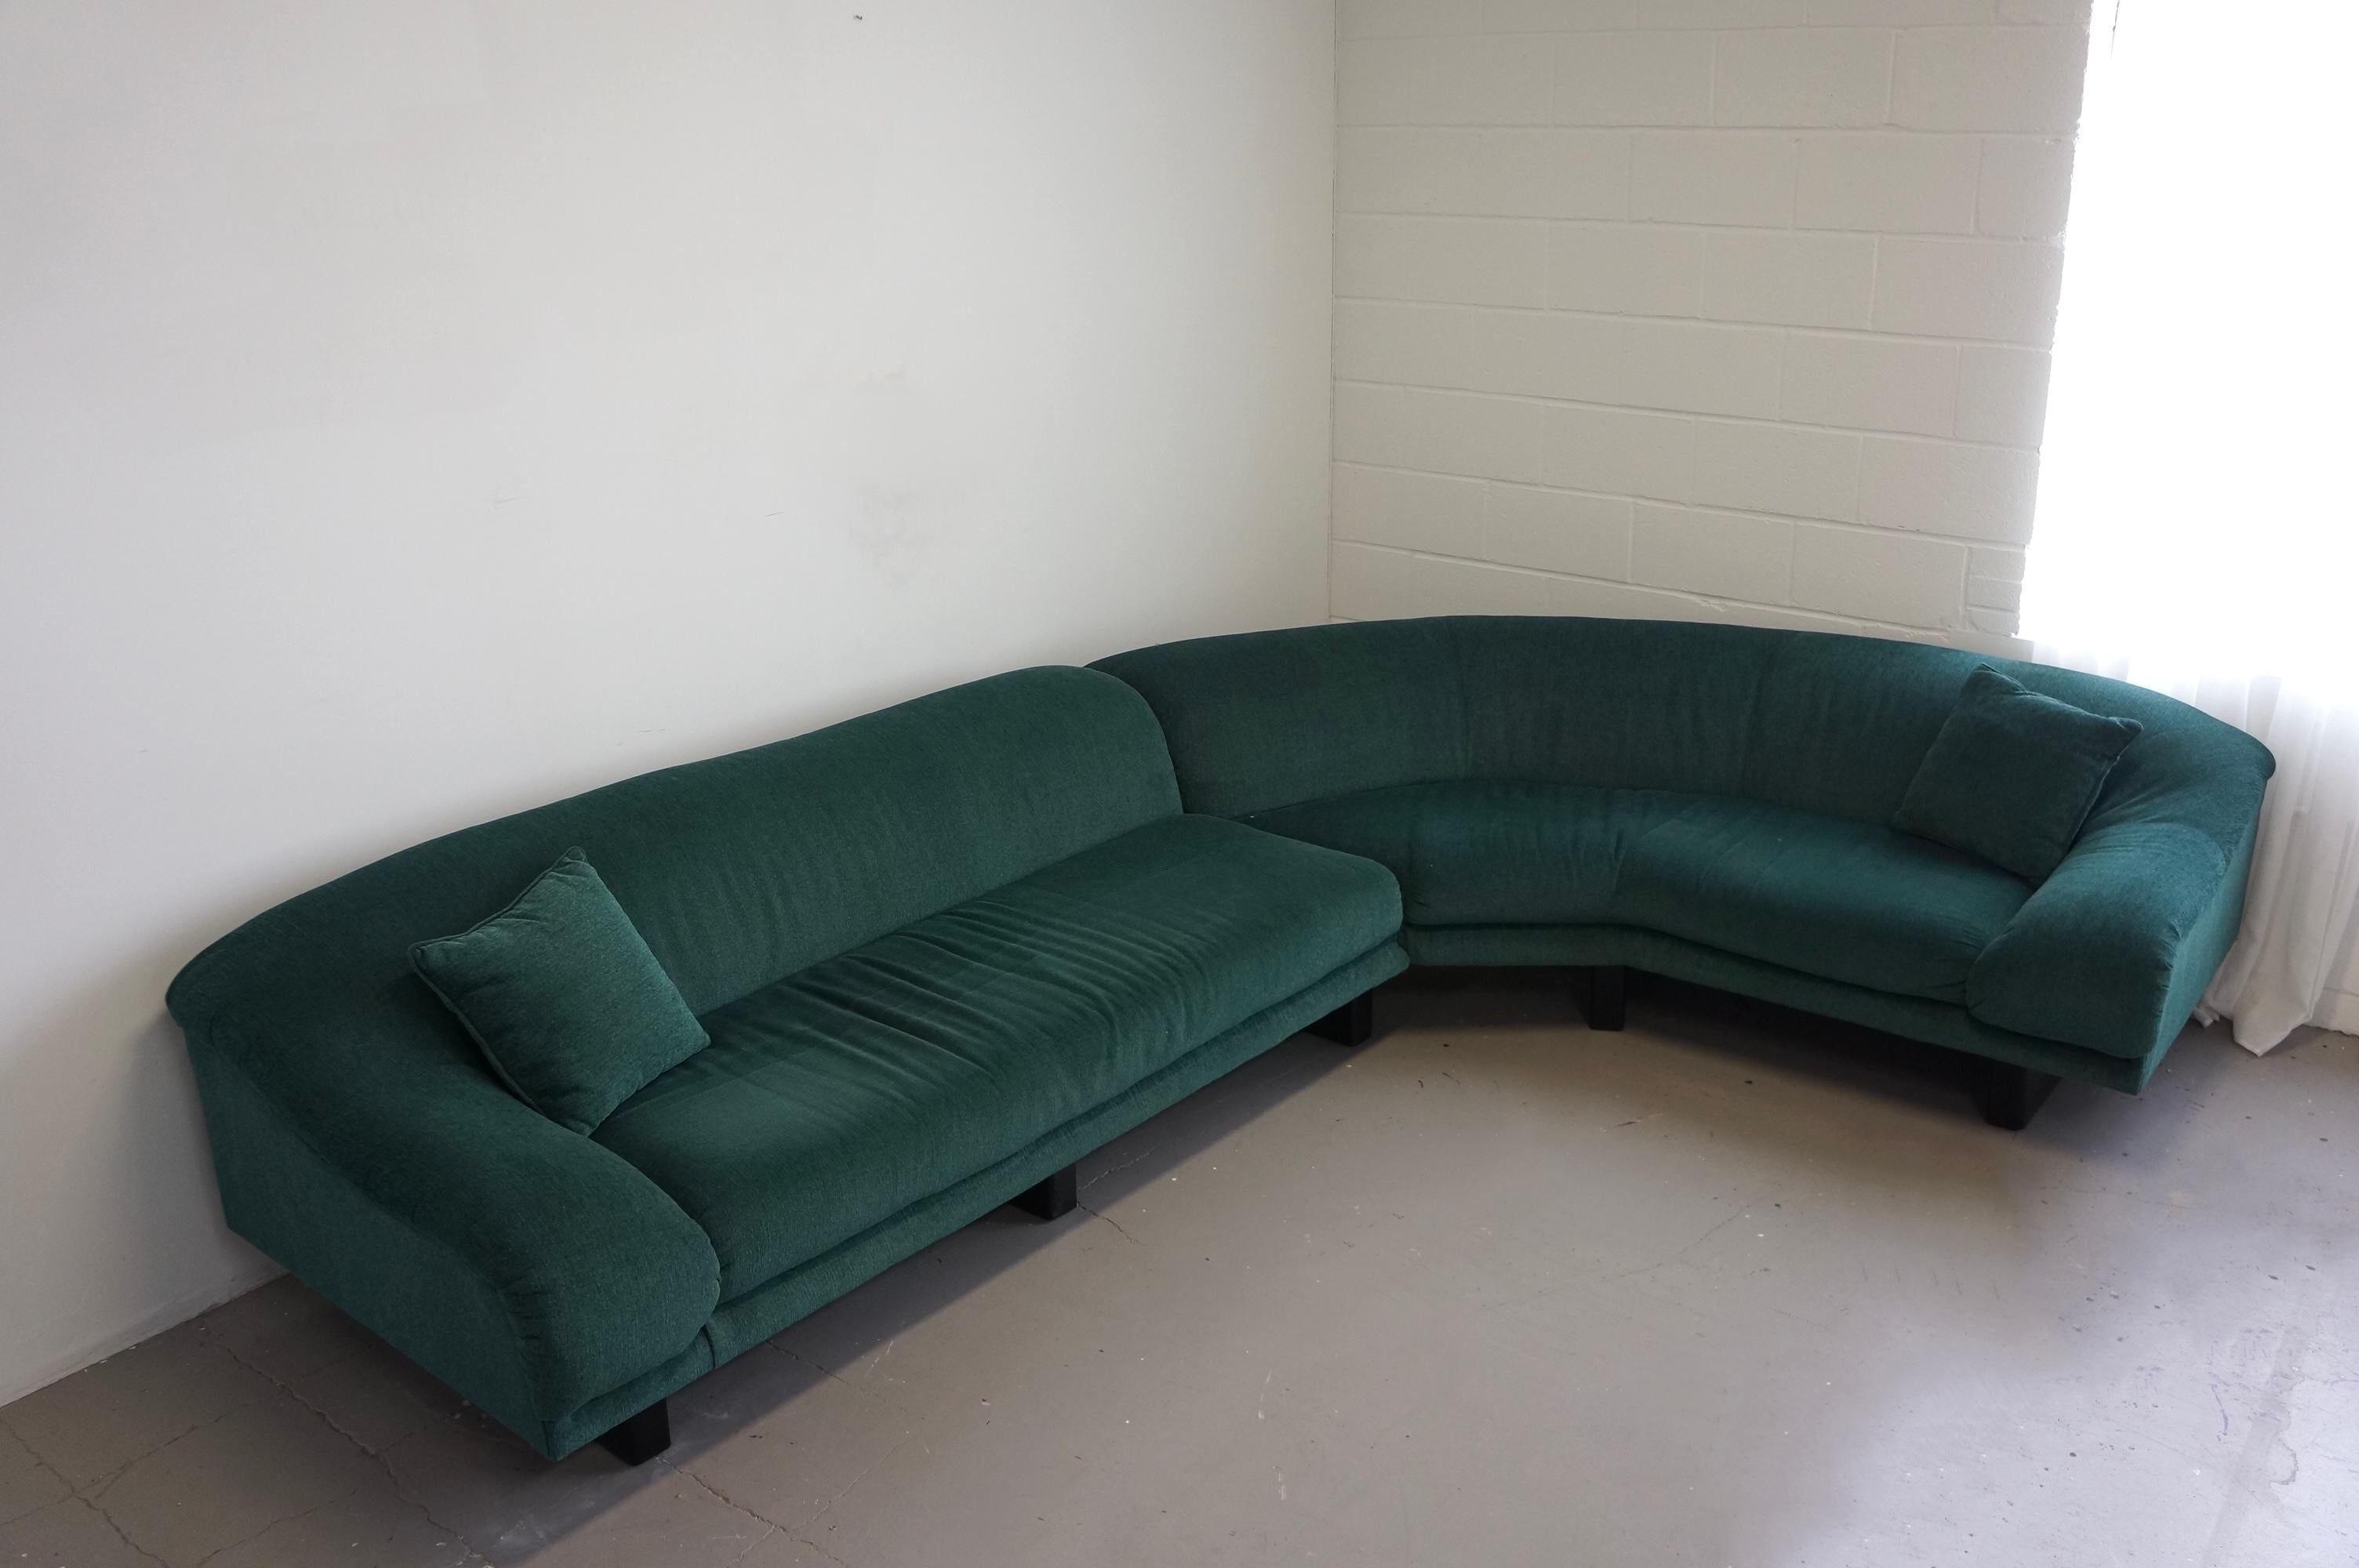 A Stunning curved sectional in gorgeous green fabric. It was made in the 1970s. It is two pieces and it’s curved which makes for a spectacular shape. 
It’s in good vintage condition, the fabric has no rips or tears. There’s some folding on the